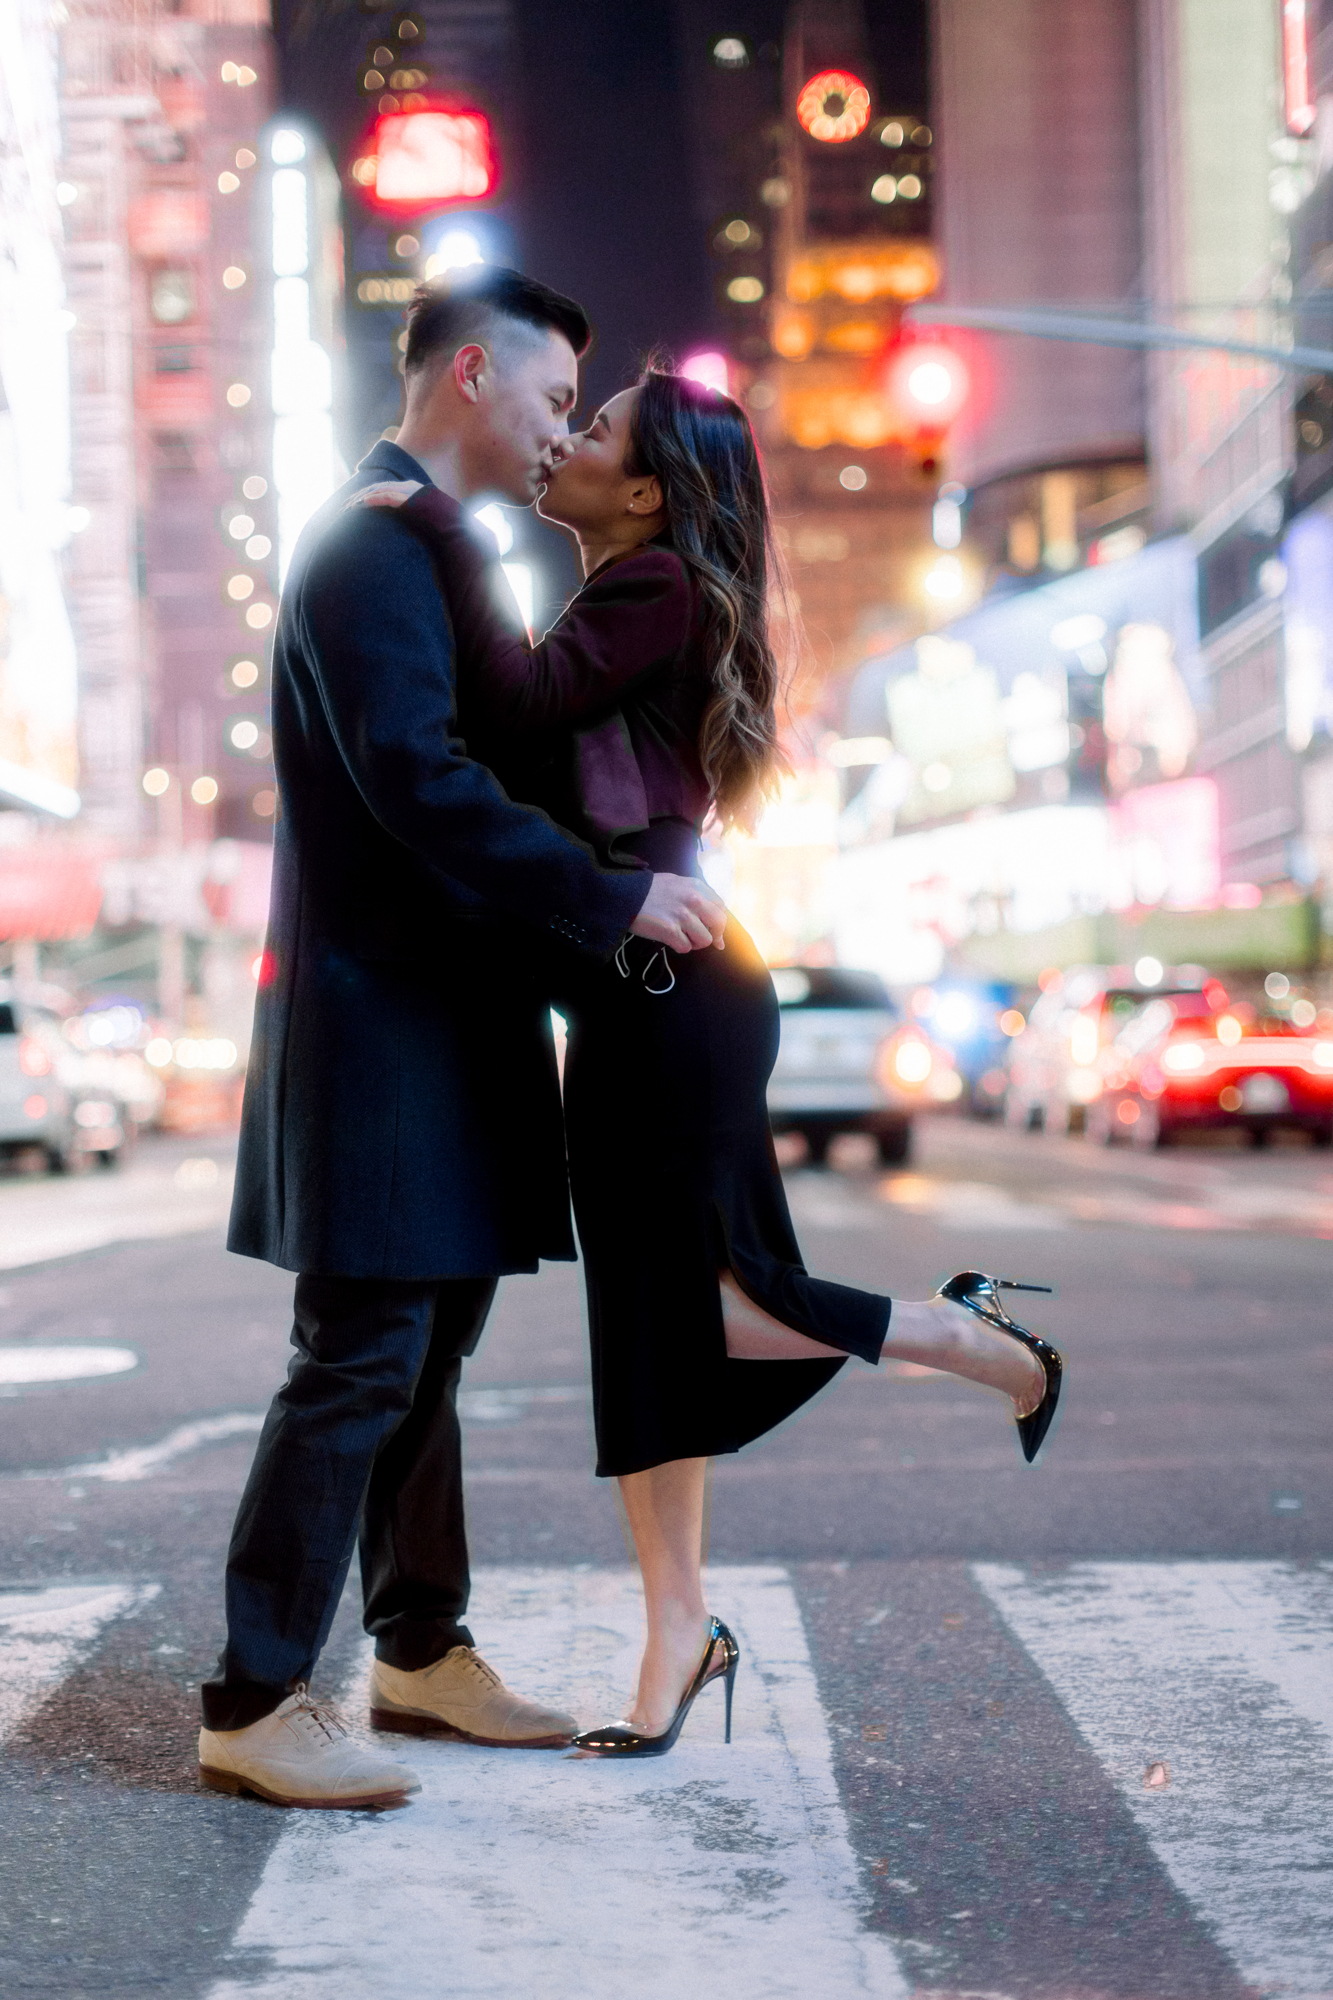 Unique Nighttime Winter Engagement Photos in New York's Iconic Times Square